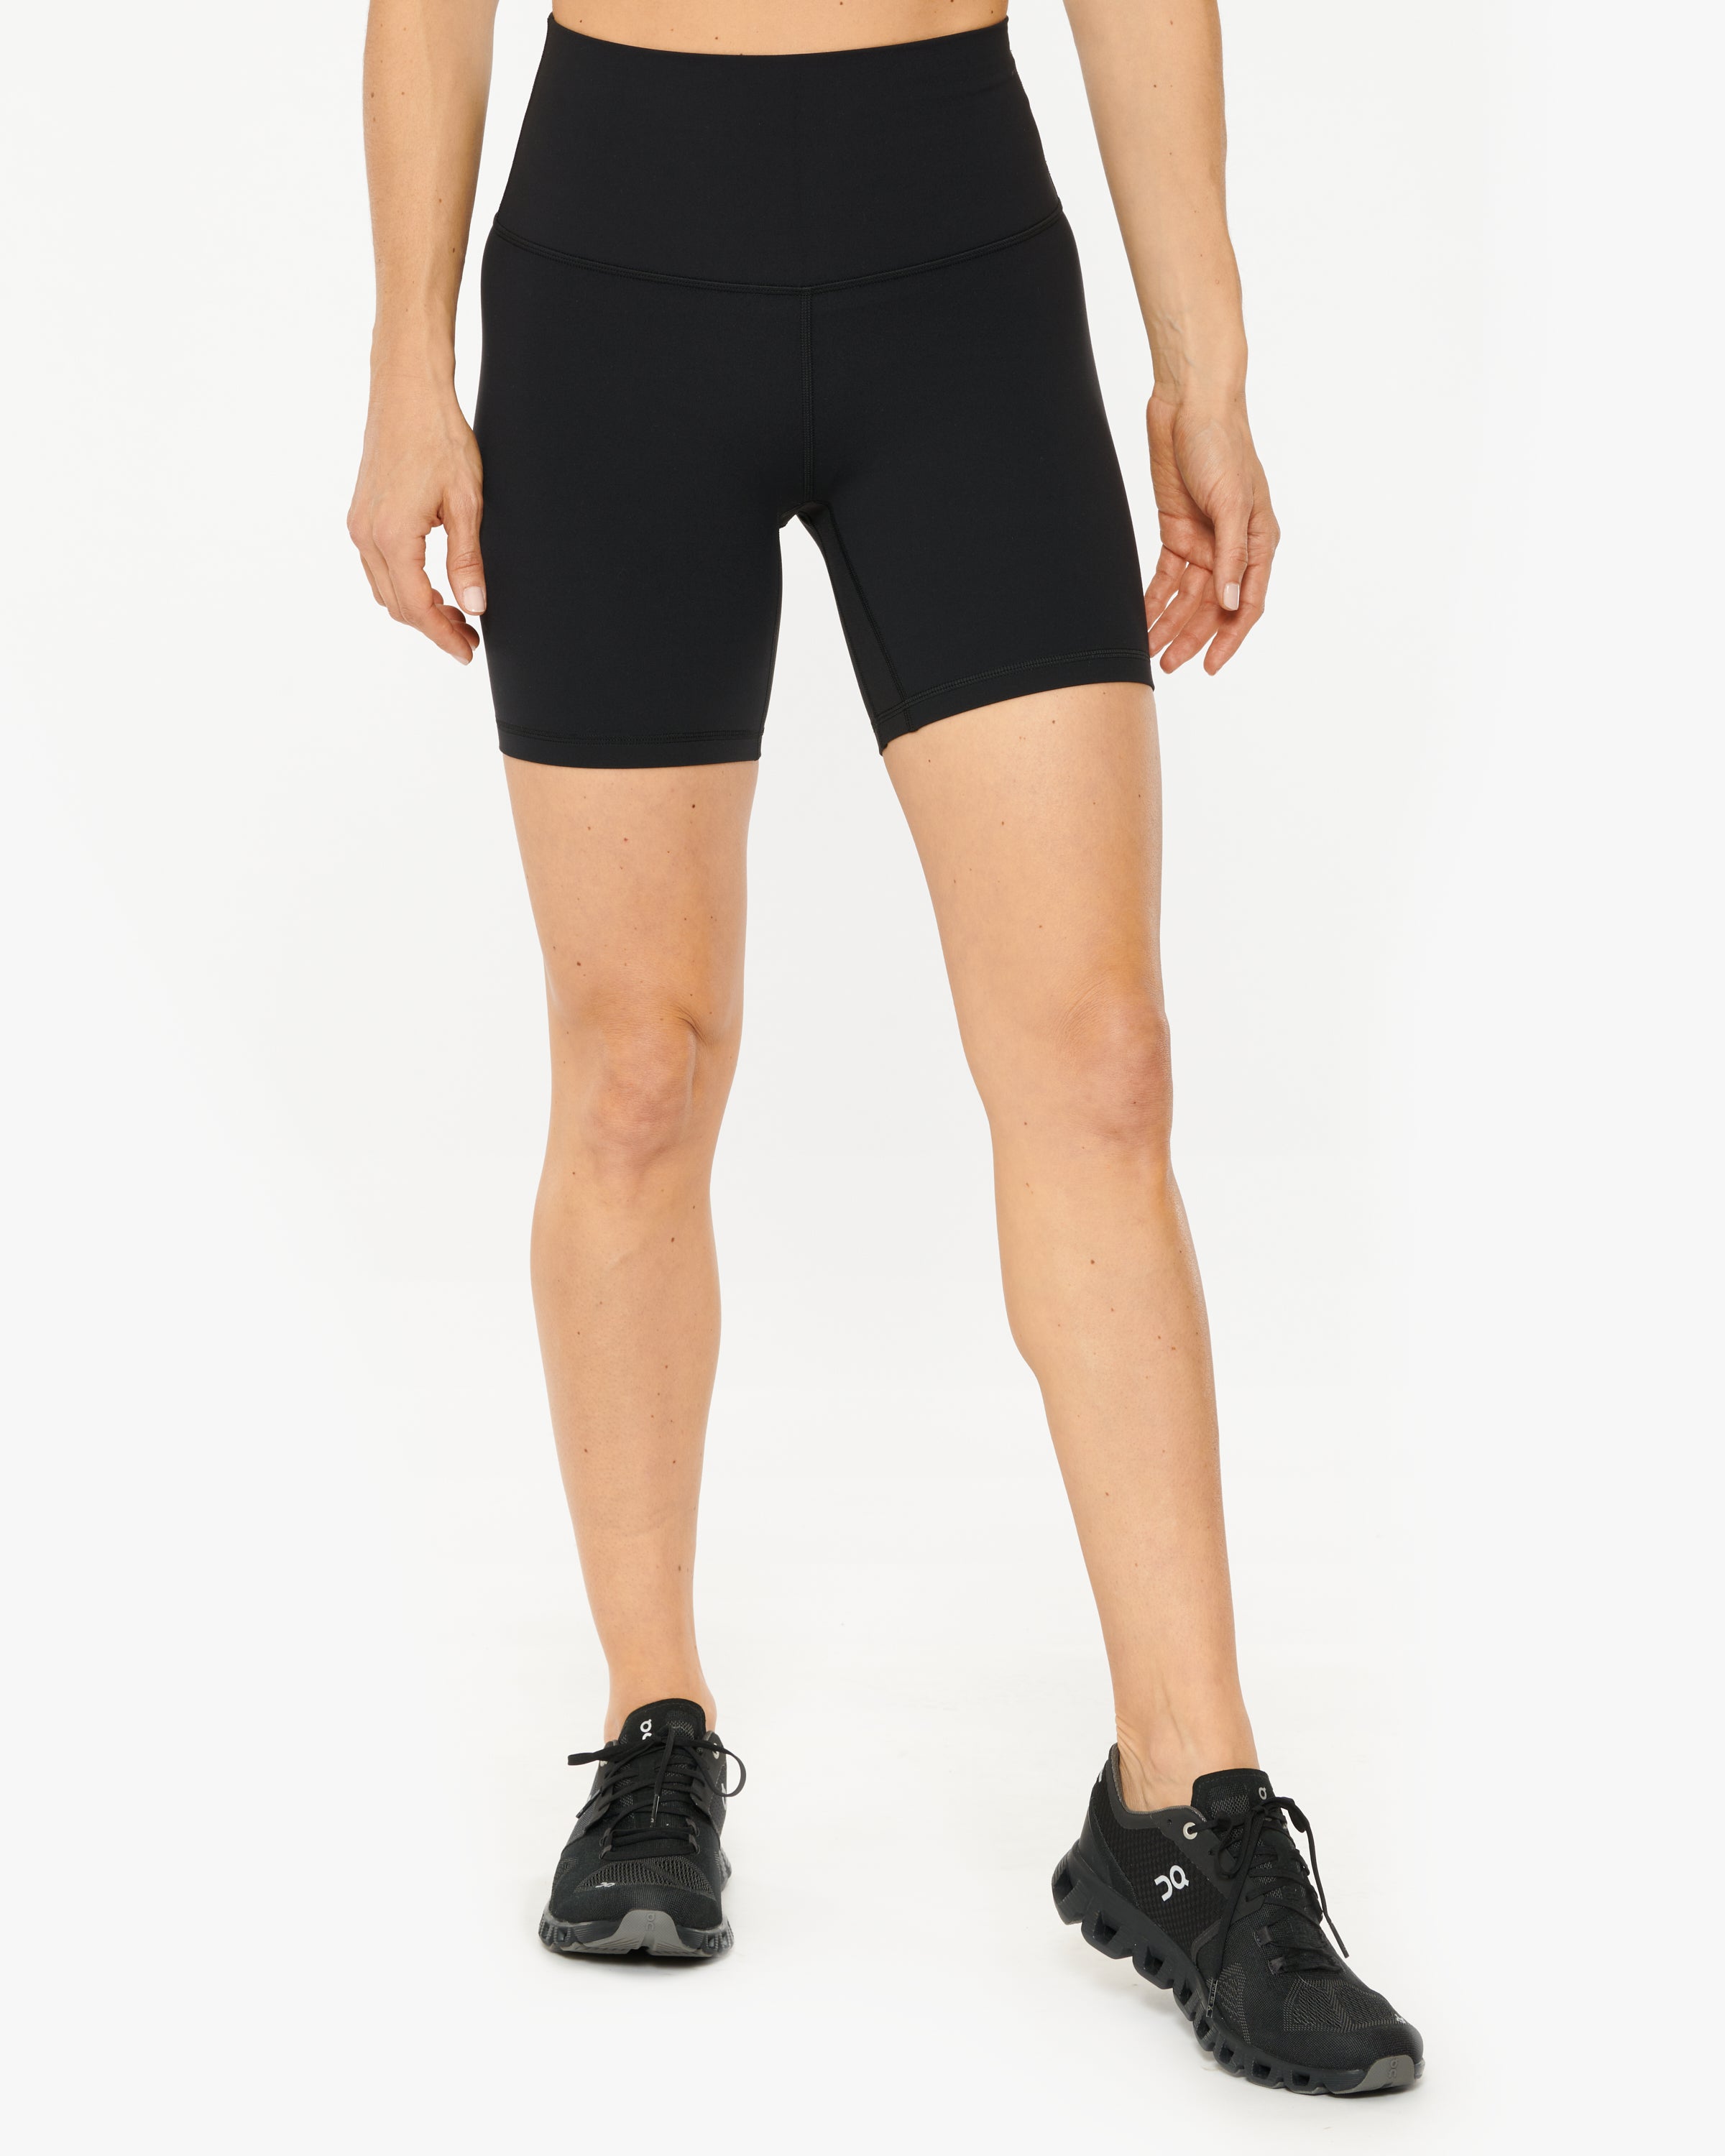 Yoga & Fitness Shorts For Women Align Leggings With Slim Fit, Perfect For  Running, Gym, And Exercise From Lulu3322, $2.66